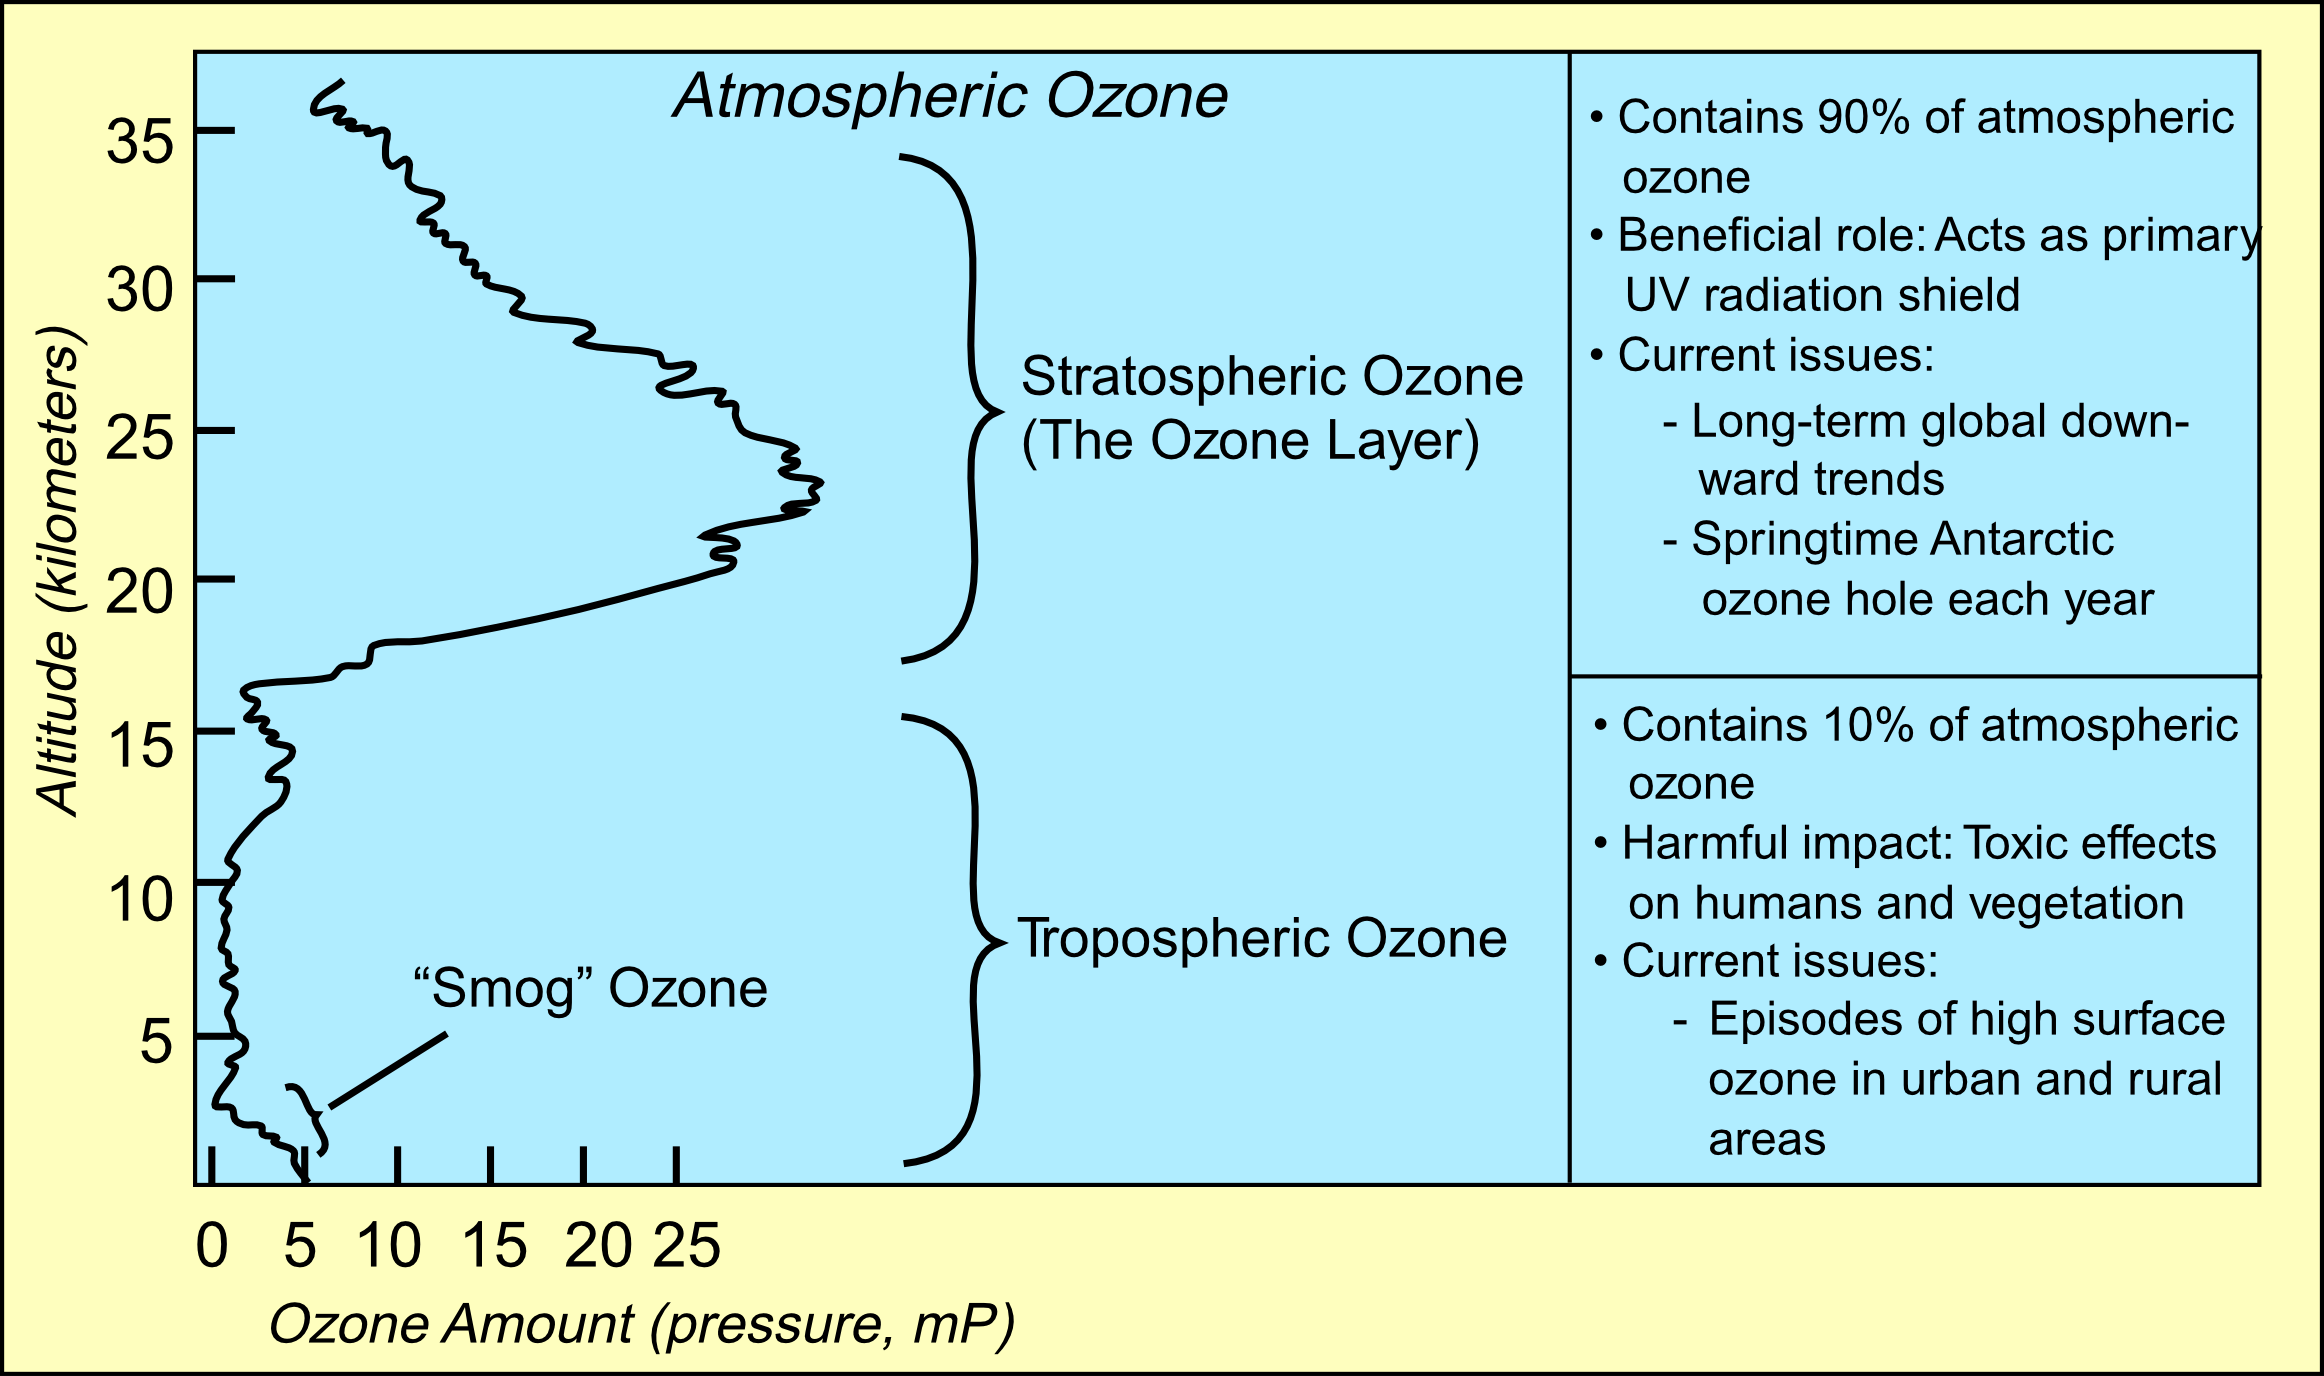 Ozone in the atmosphere